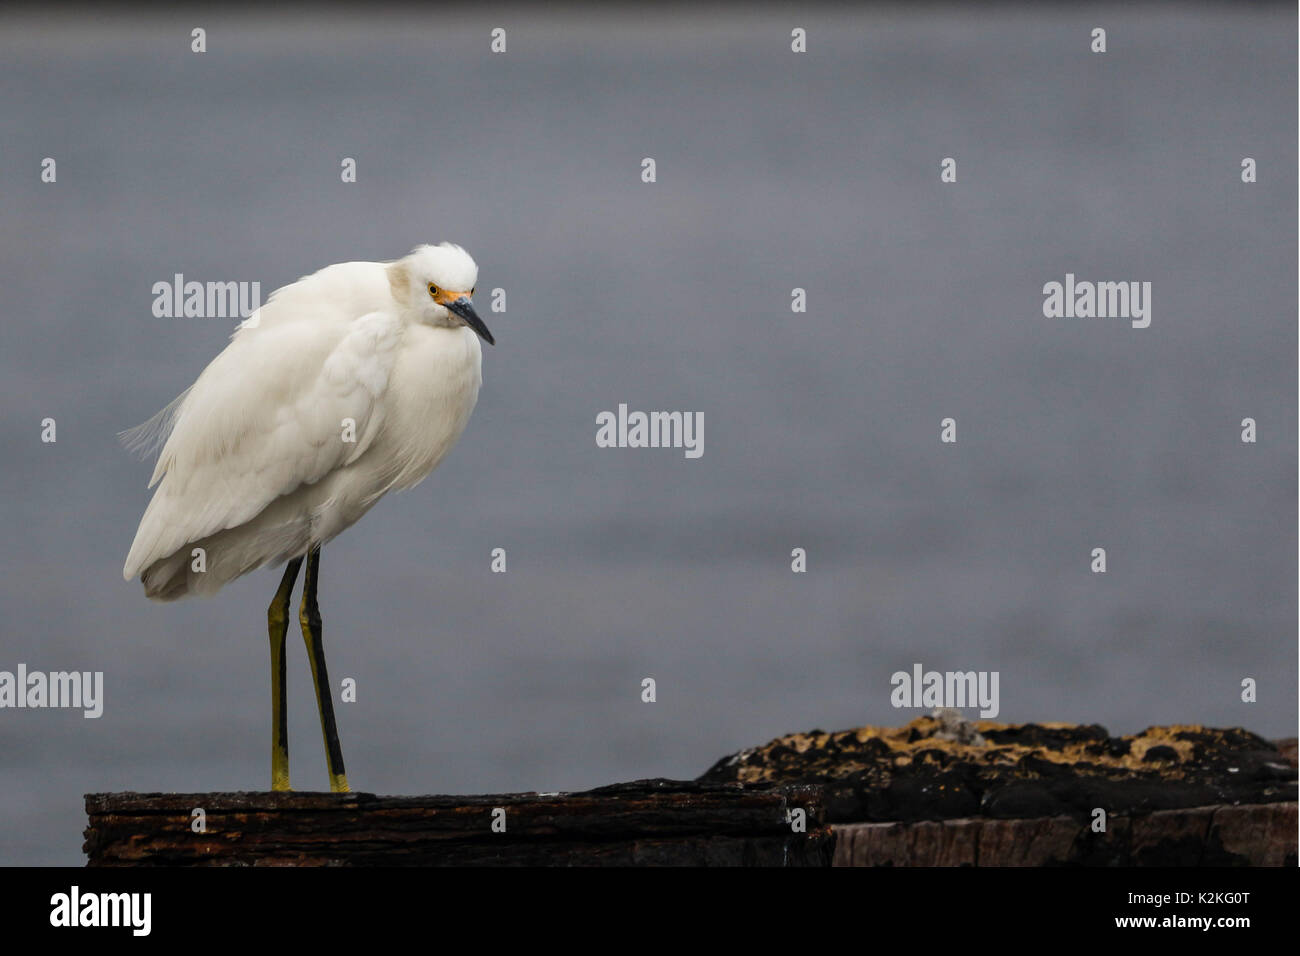 Rio de Janeiro, Brazil, August 31, 2017: End of August is marked by falling temperatures in the city of Rio de Janeiro. The thermometers marked below 20 degrees celsius. In this image seabird in Guanabara Bay, in downtown Rio. Credit: Luiz Souza/Alamy Live News Stock Photo